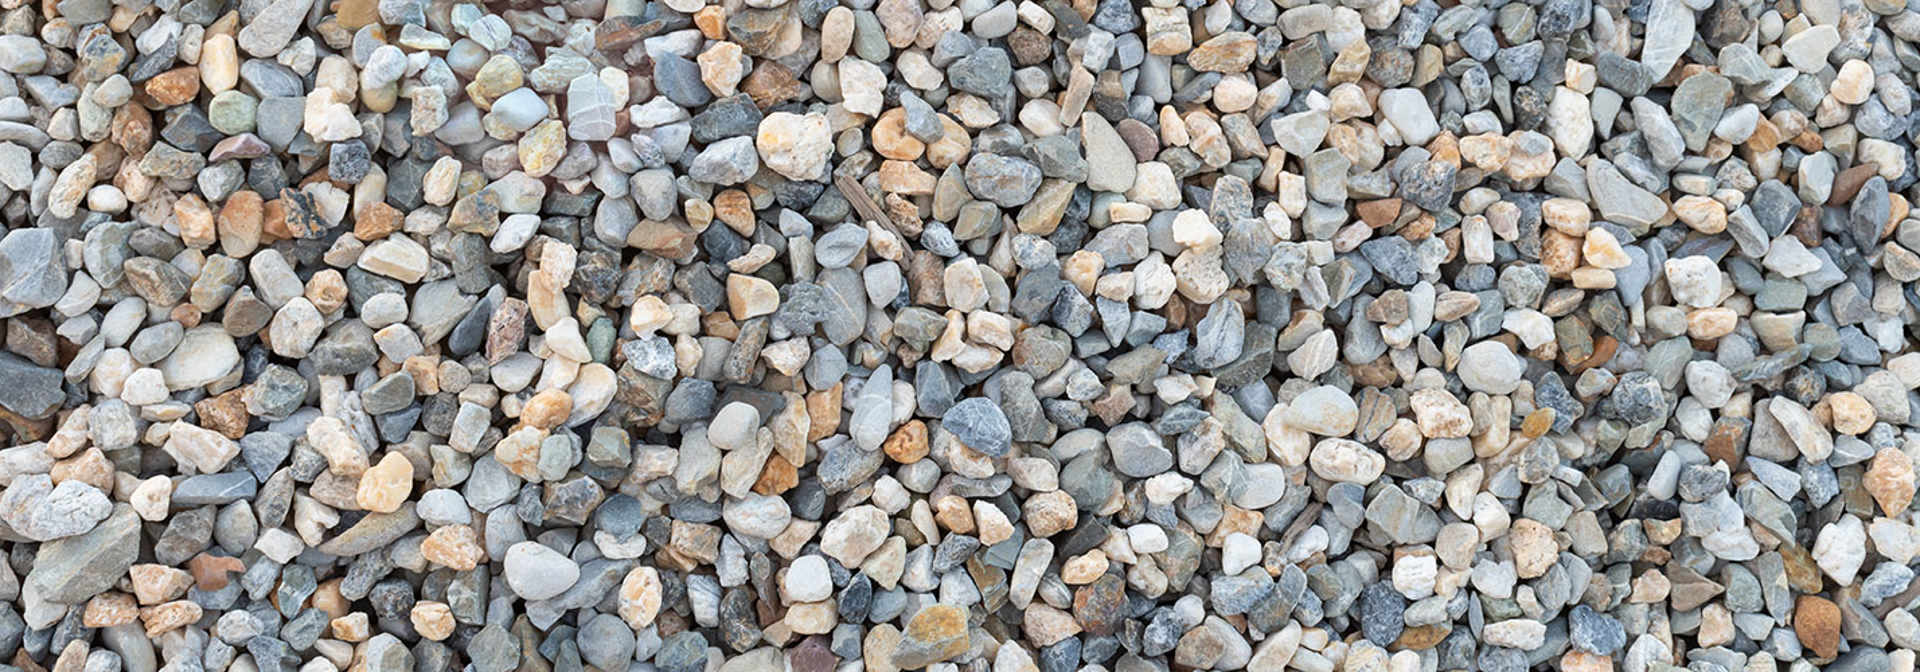 Foam Rocks Pebble (Approximately 2 by 2 by 2 Inches)